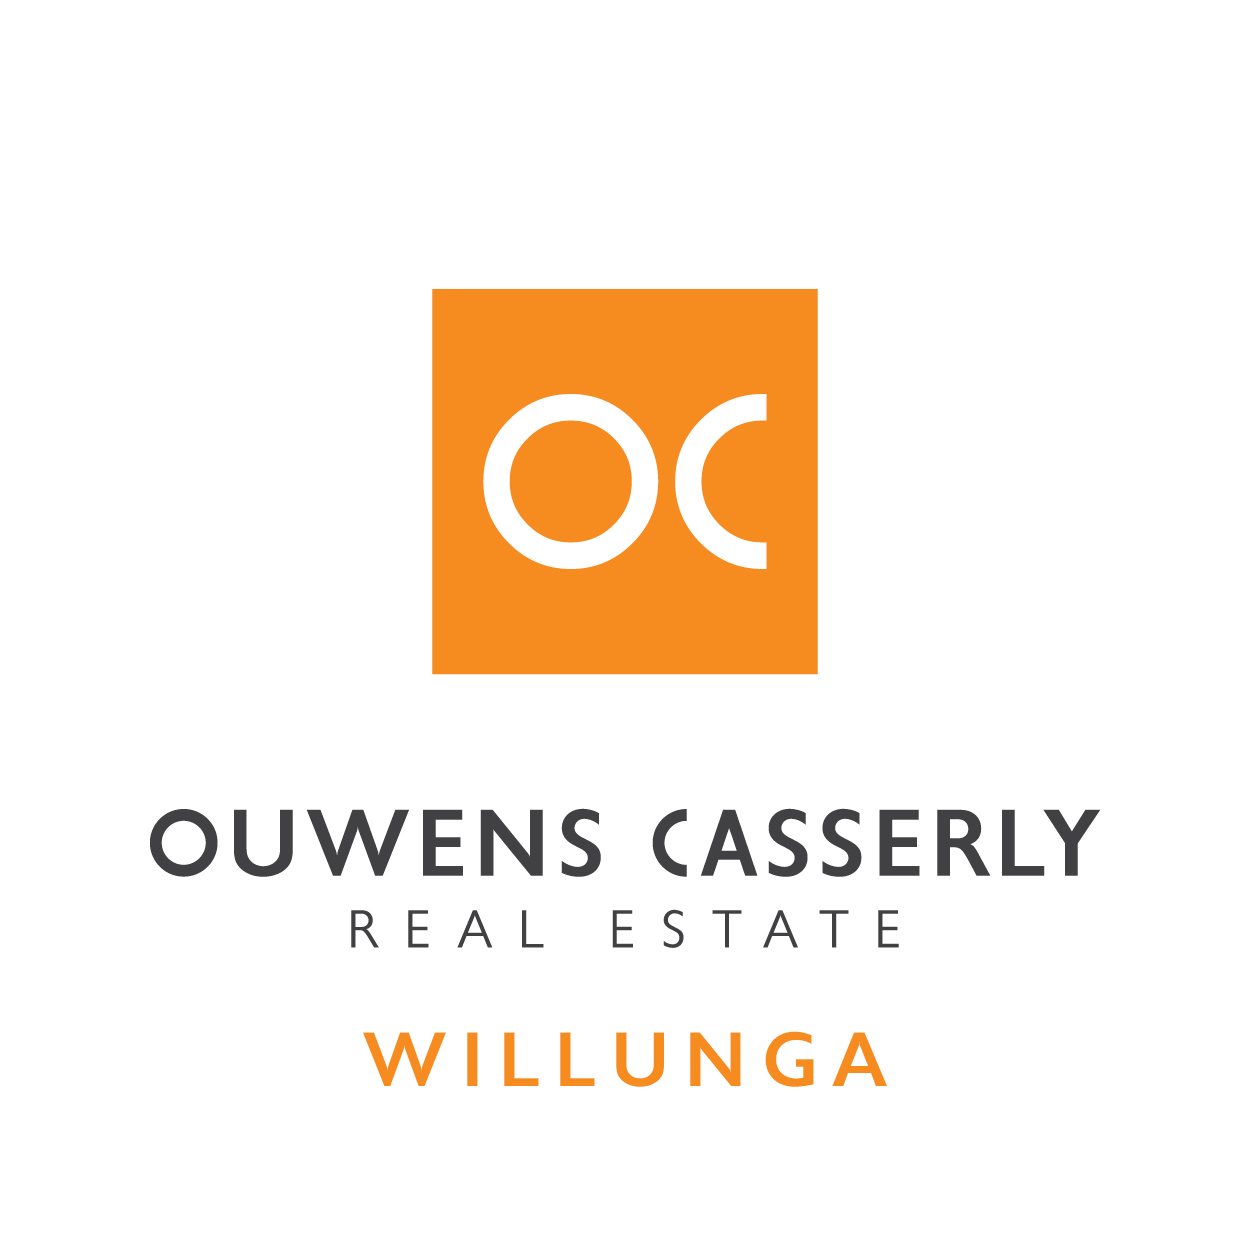 Ouwens Casserley Real Estate